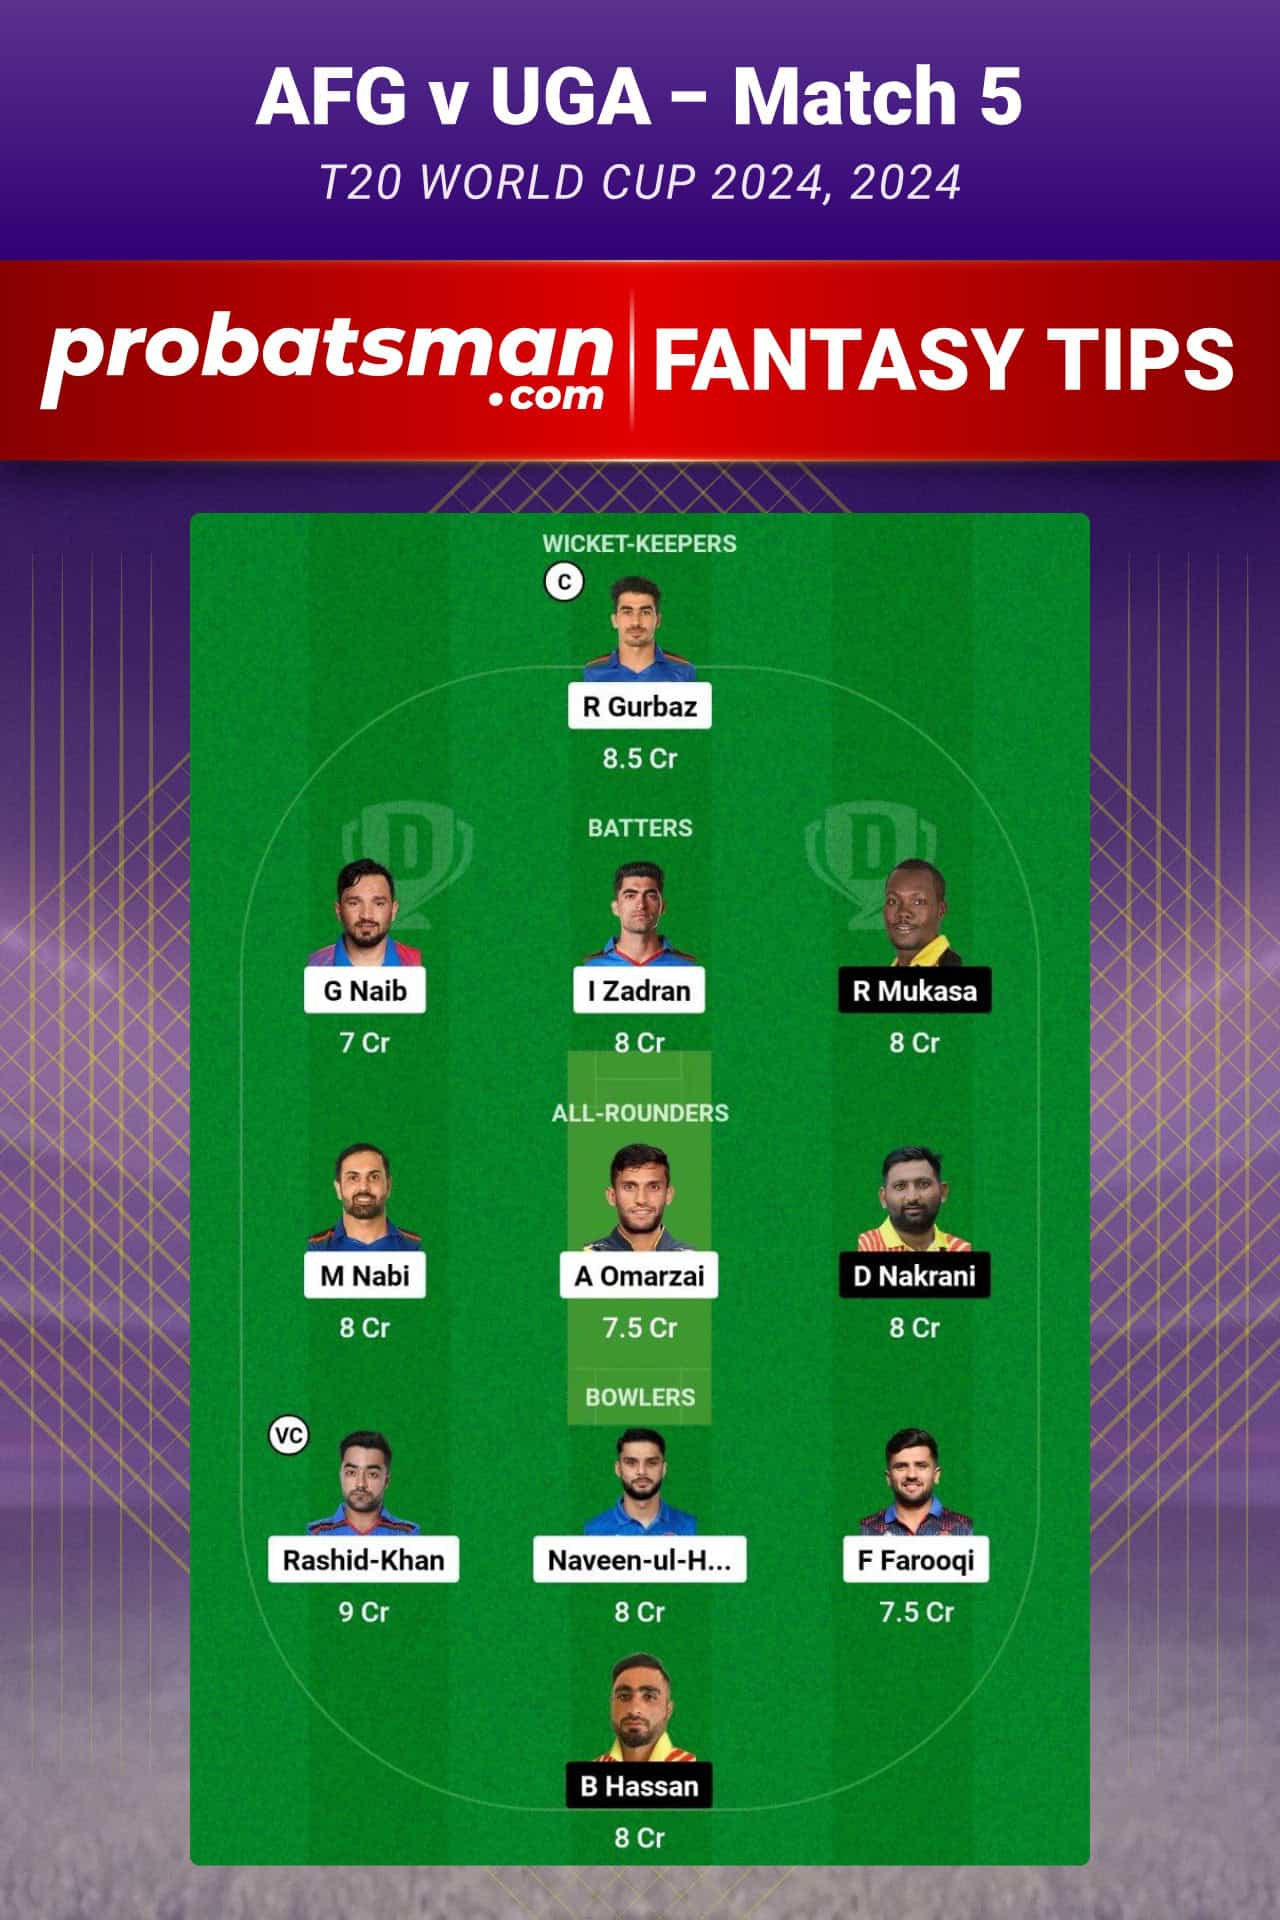 AFG vs UGA Dream11 Prediction For Match 5 of T20 World Cup 2024